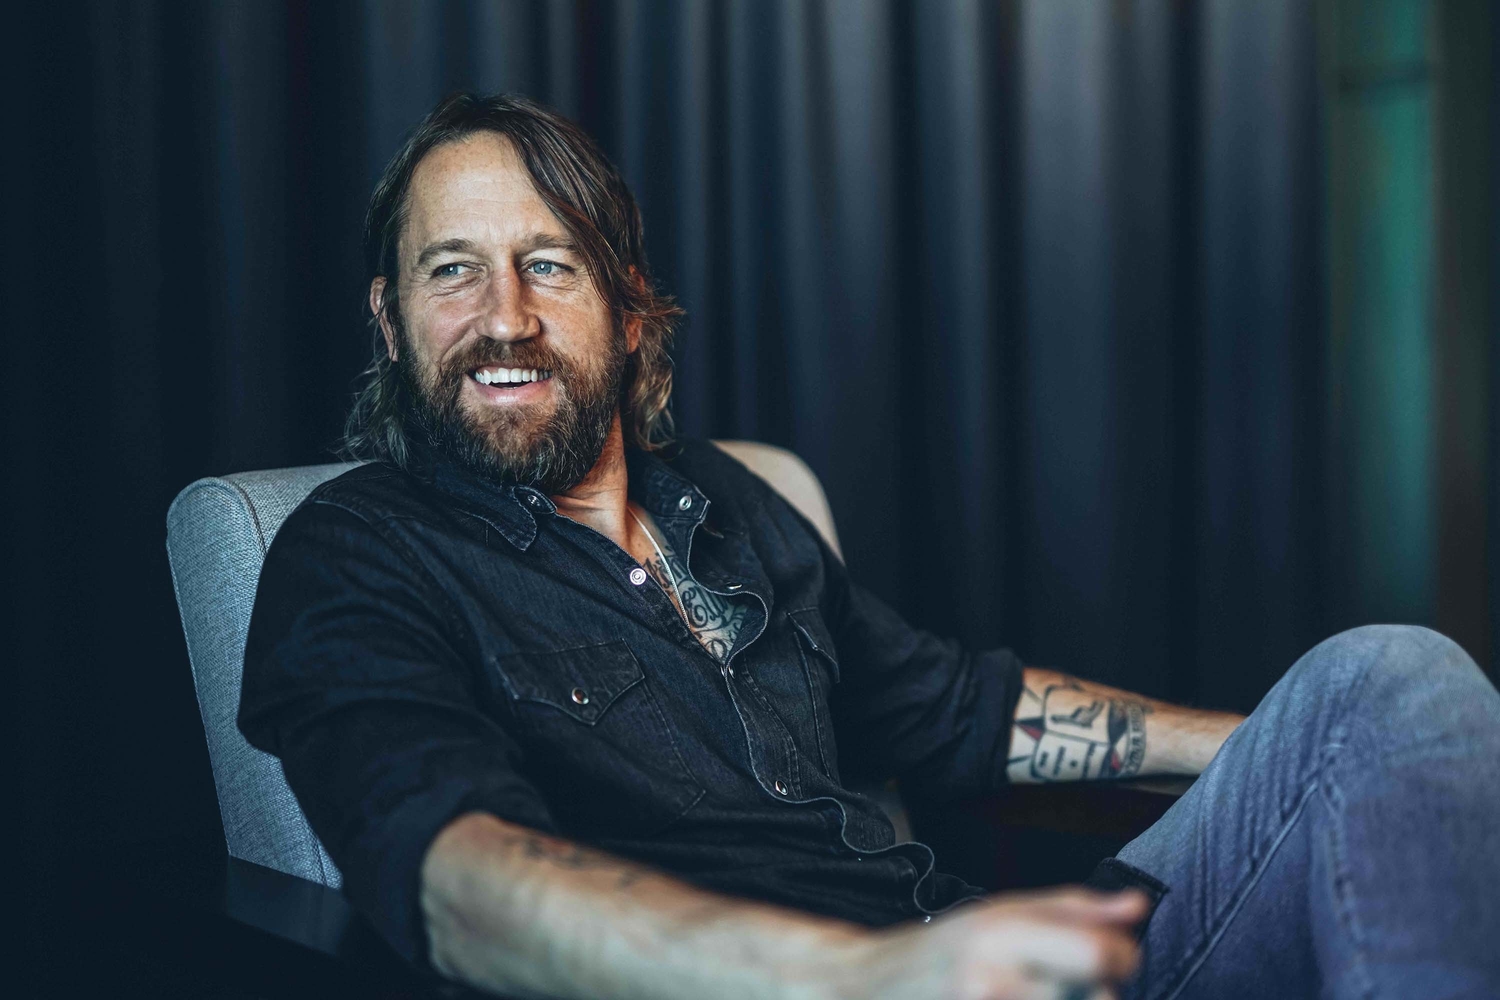 Foo Fighters’ Chris Shiflett to release new album ‘Hard Lessons’